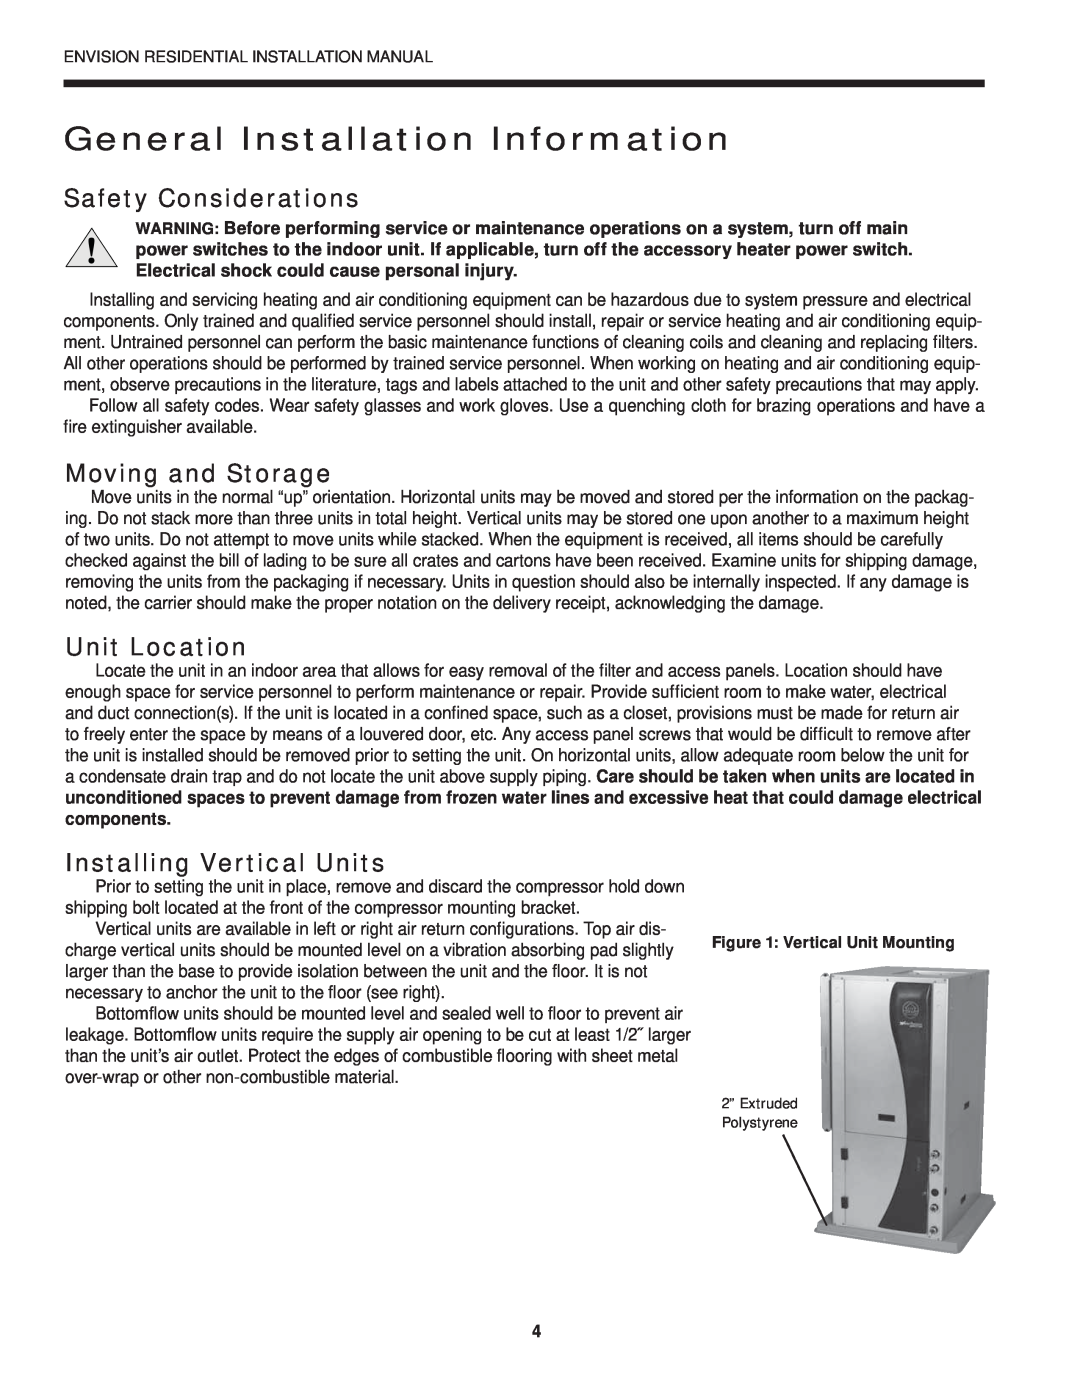 Envision Peripherals R-410A General Installation Information, Safety Considerations, Moving and Storage, Unit Location 